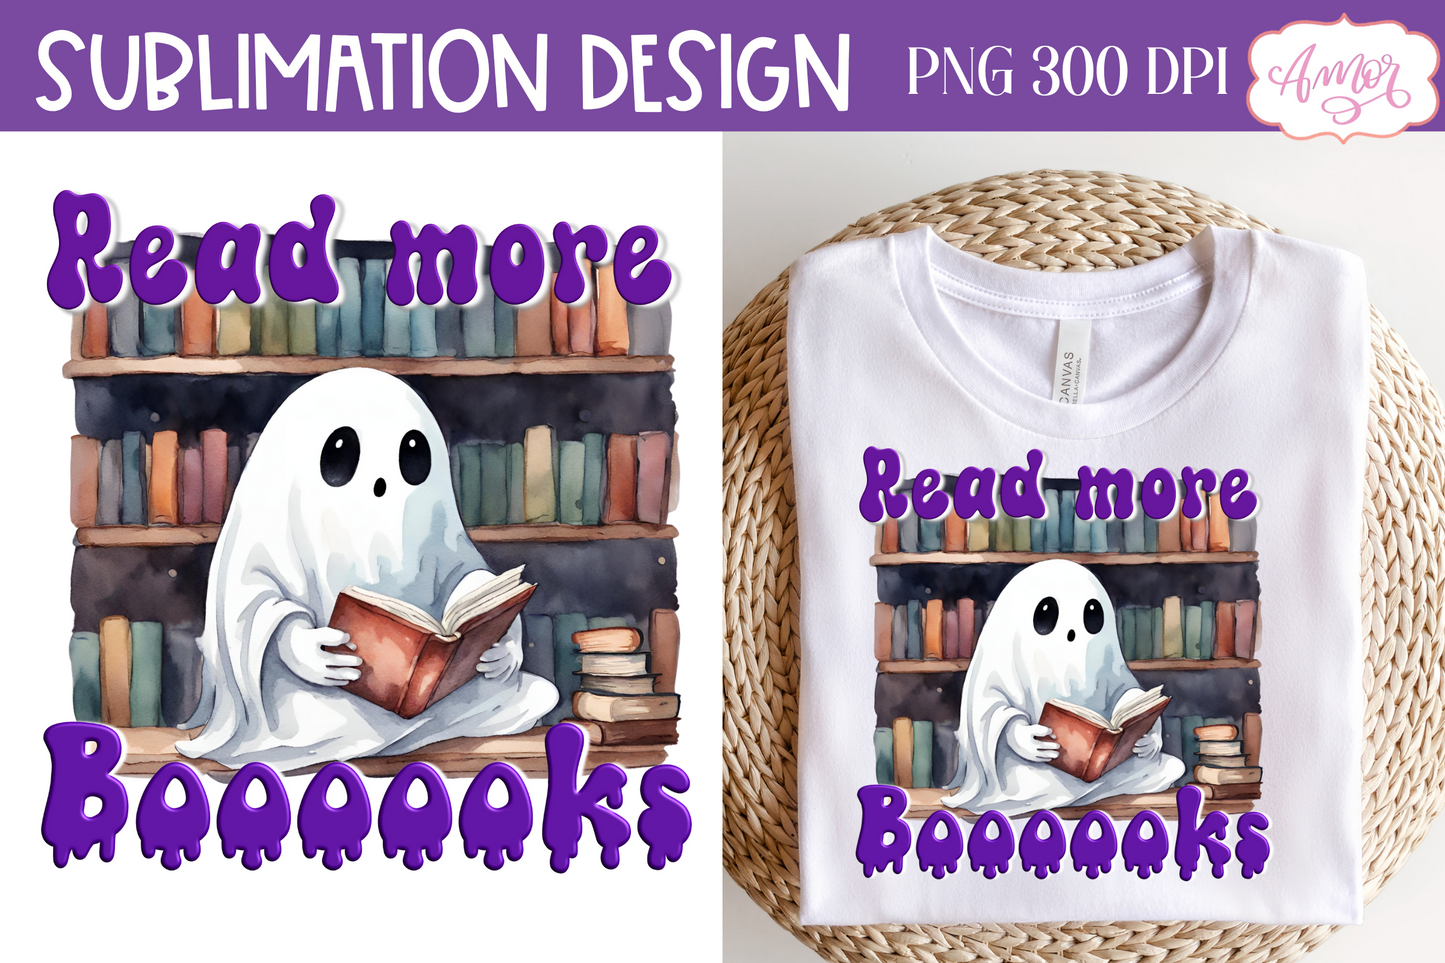 Read more books halloween PNG for sublimation